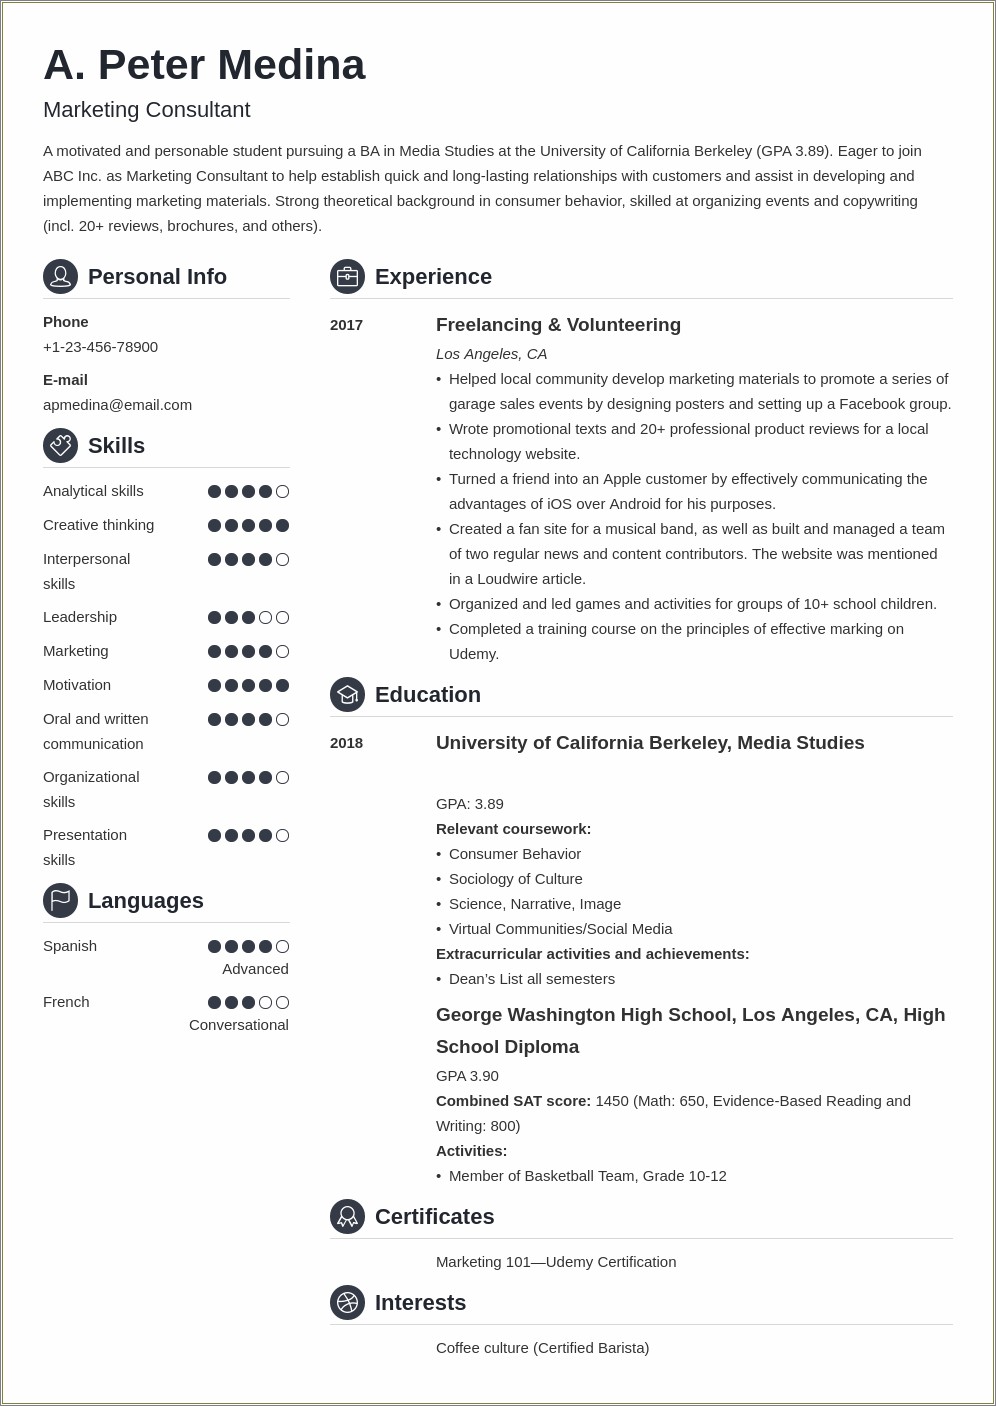 Resume Summary Thats Best For Little Experience